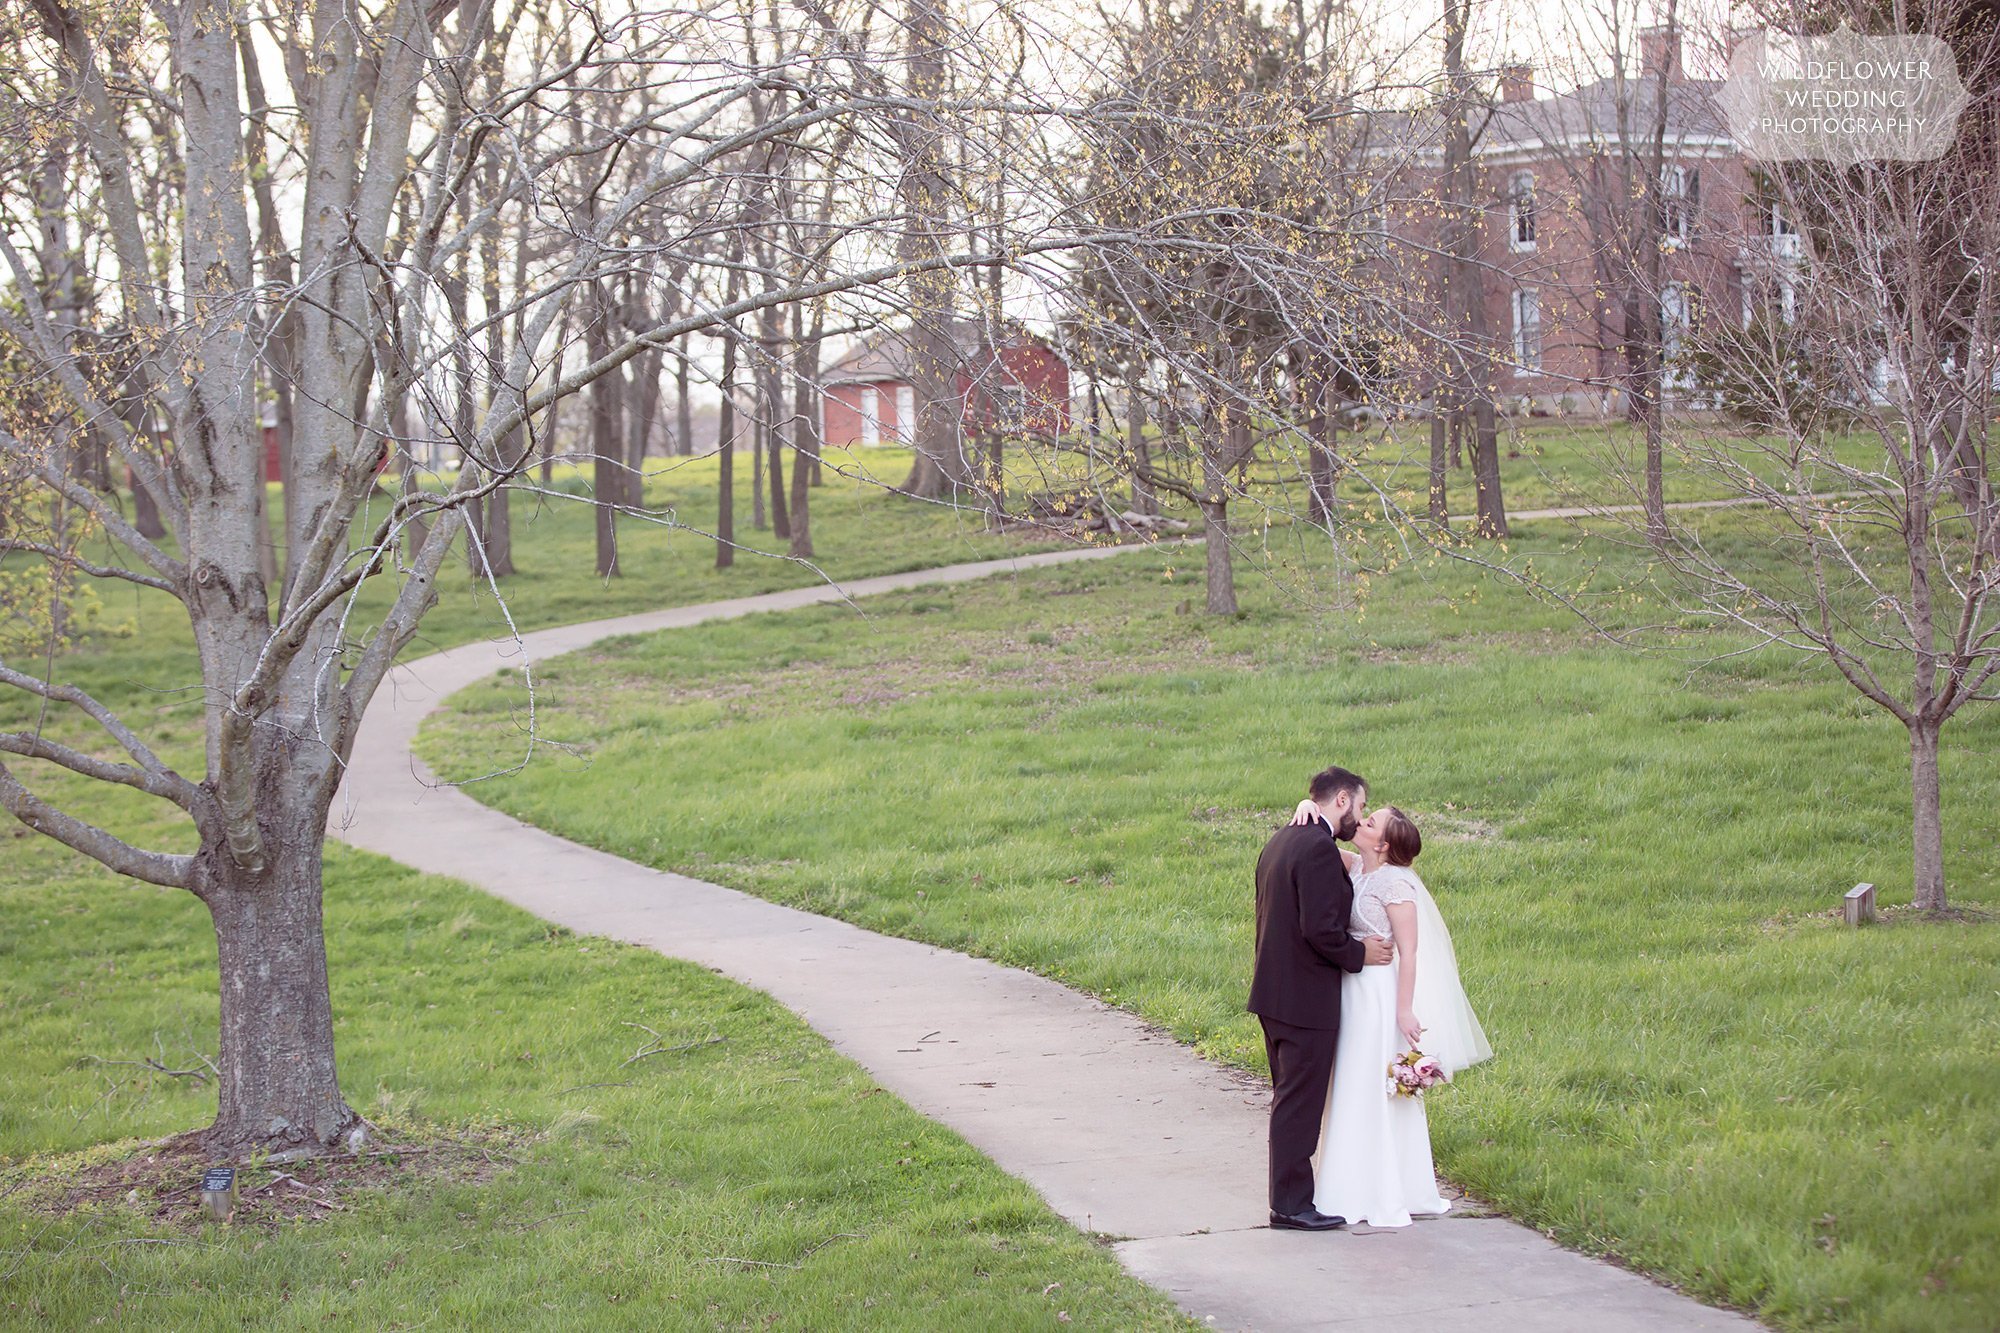 High quality elopement photography at Nifong Park in Columbia, MO.